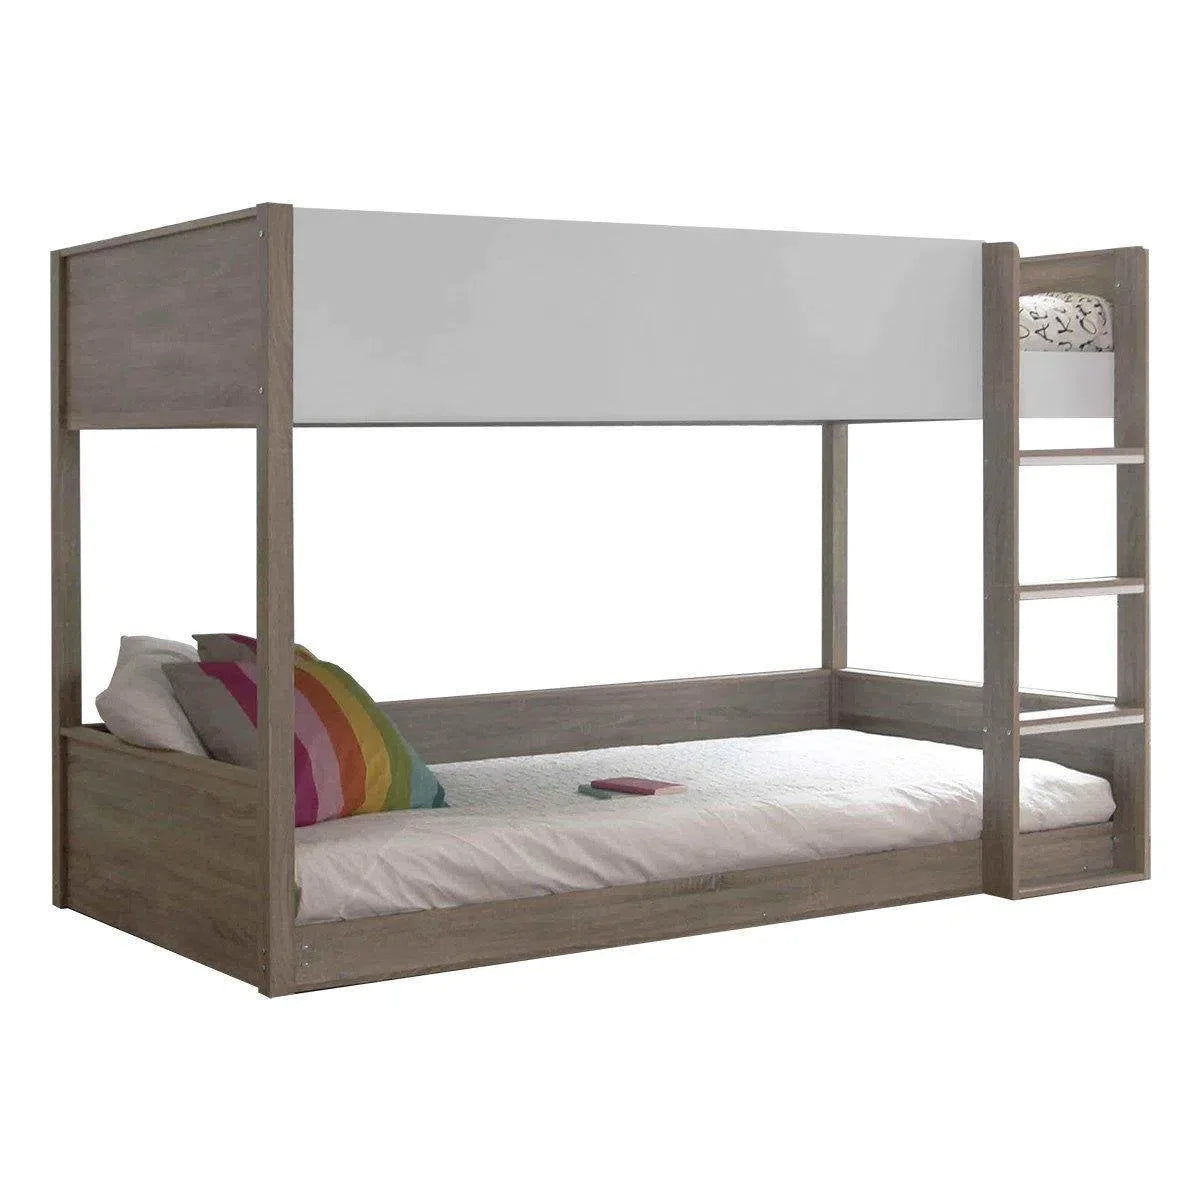 Gisborne Bunk Bed with Low Bottom Bunk and Side Ladder in Oak Finish-Sleep Doctor